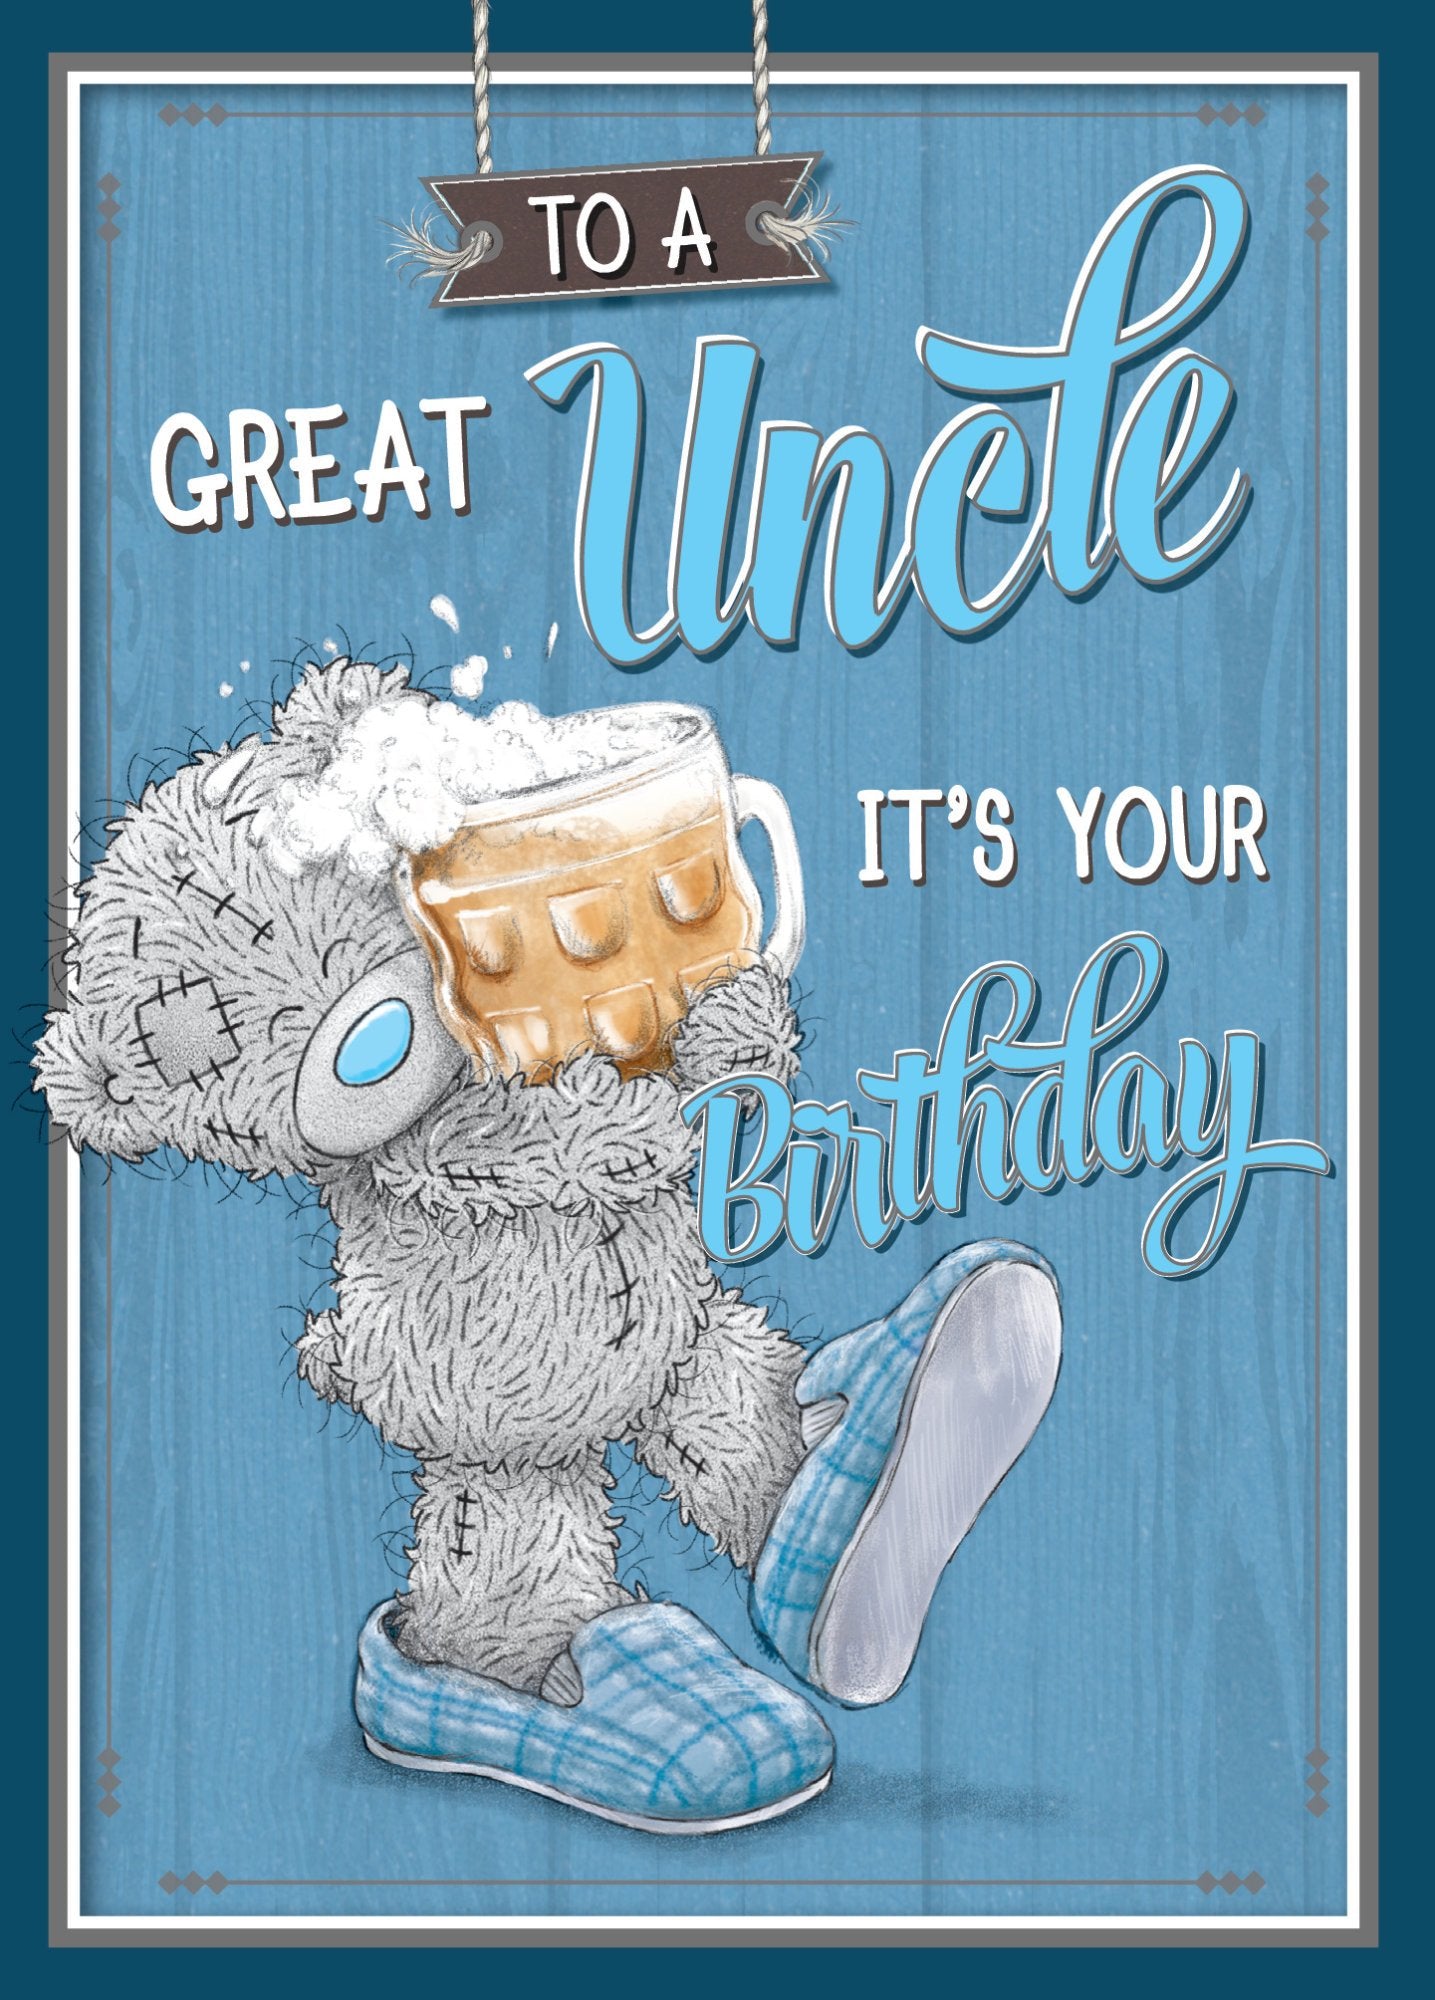 Photograph of Uncle Birthday Teddy Pint Greetings Card at Nicole's Shop